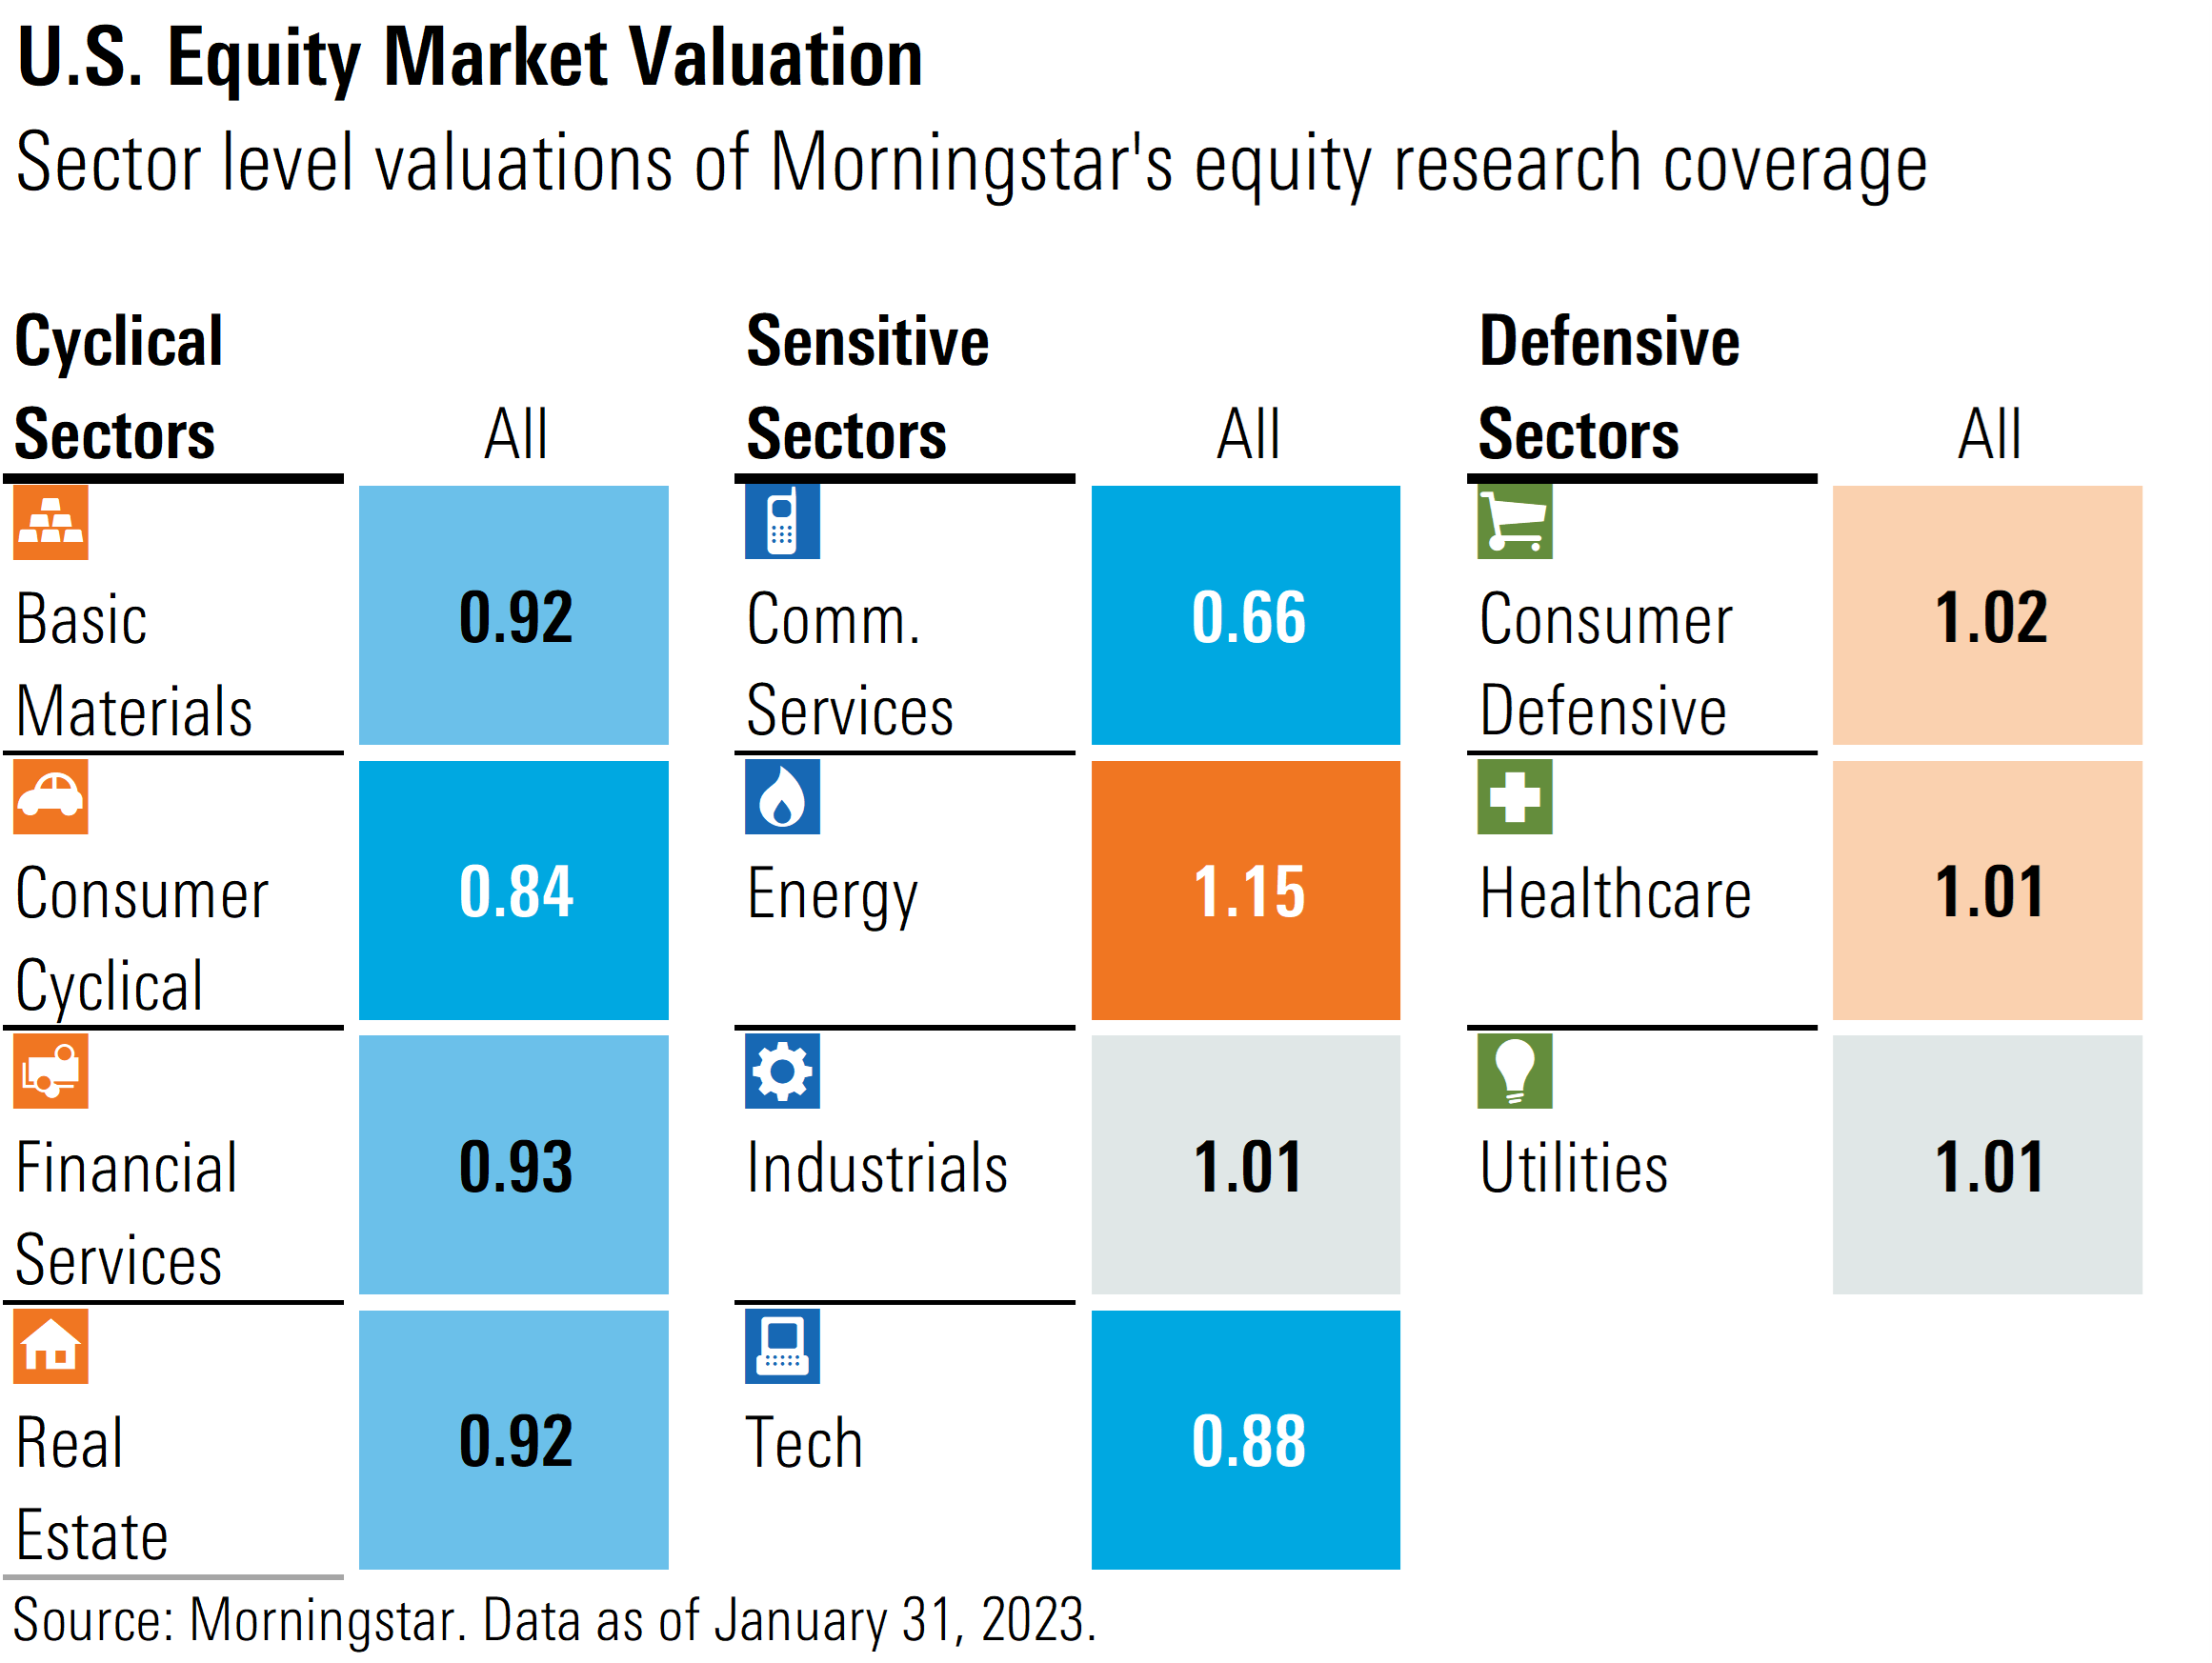 U.S. Equity Market: Sector Valuations